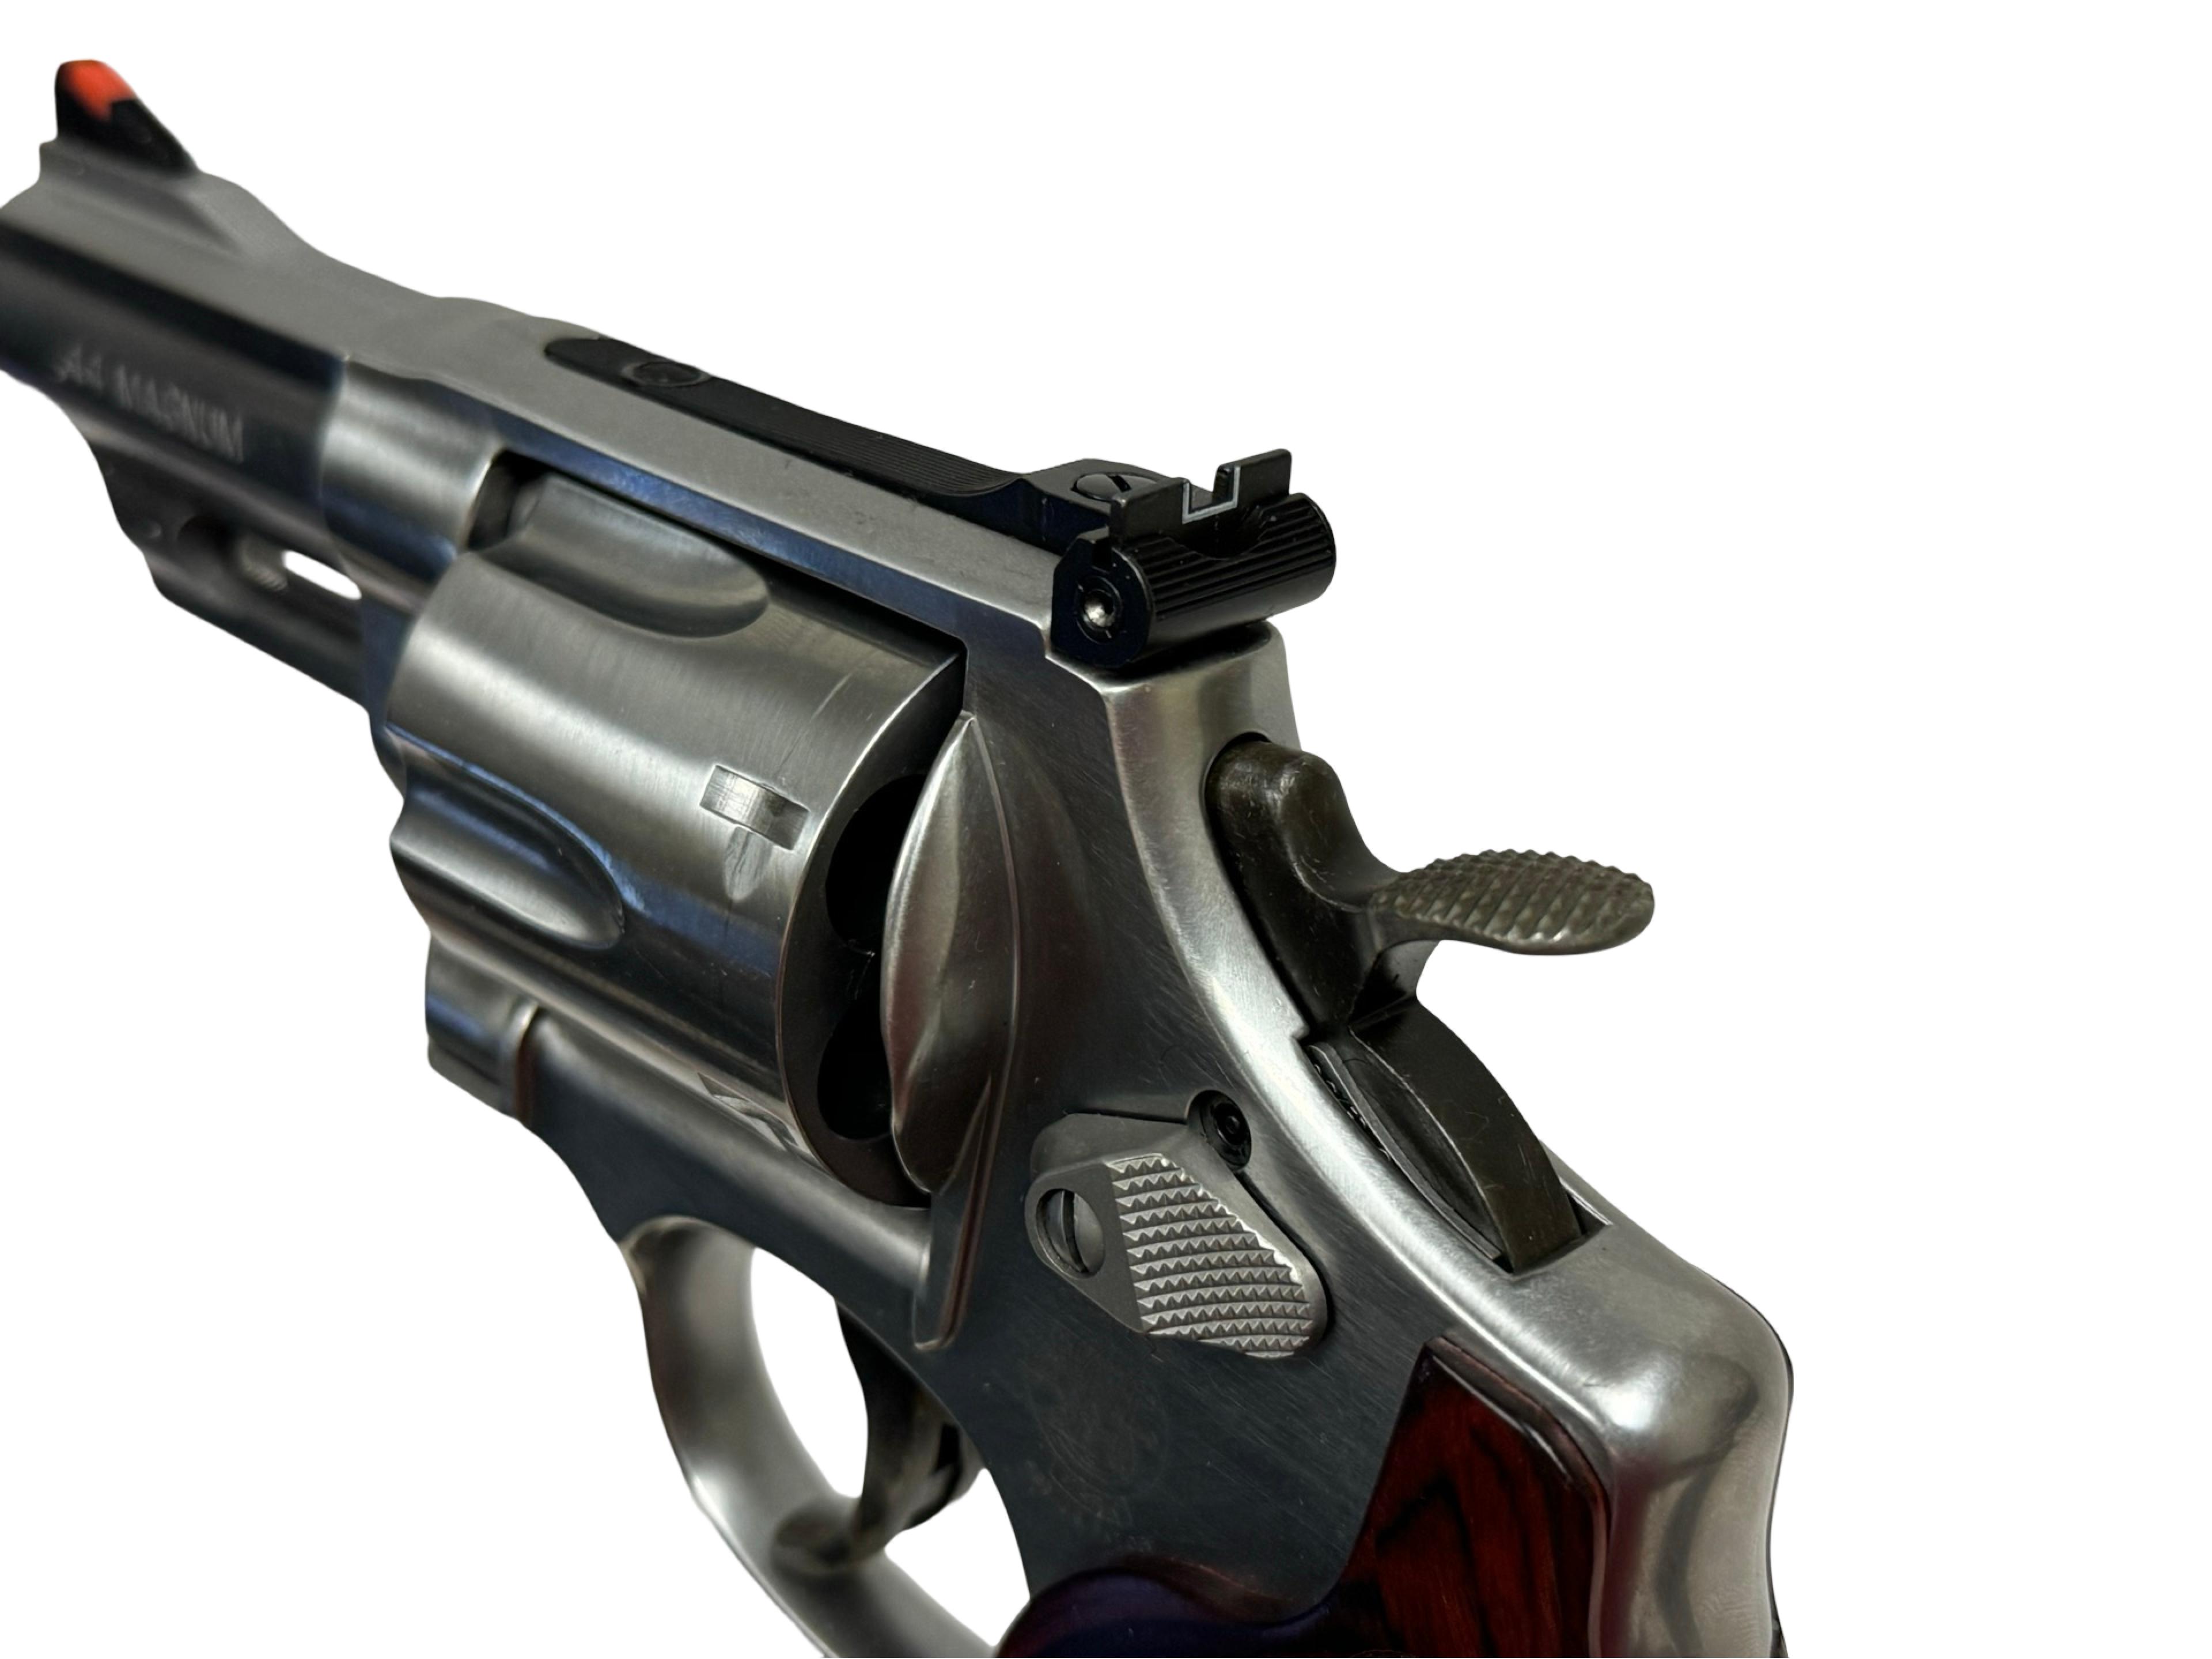 Excellent Smith & Wesson Model 629-6 Performance Center 3" .44 MAGNUM Stainless Revolver in Bag